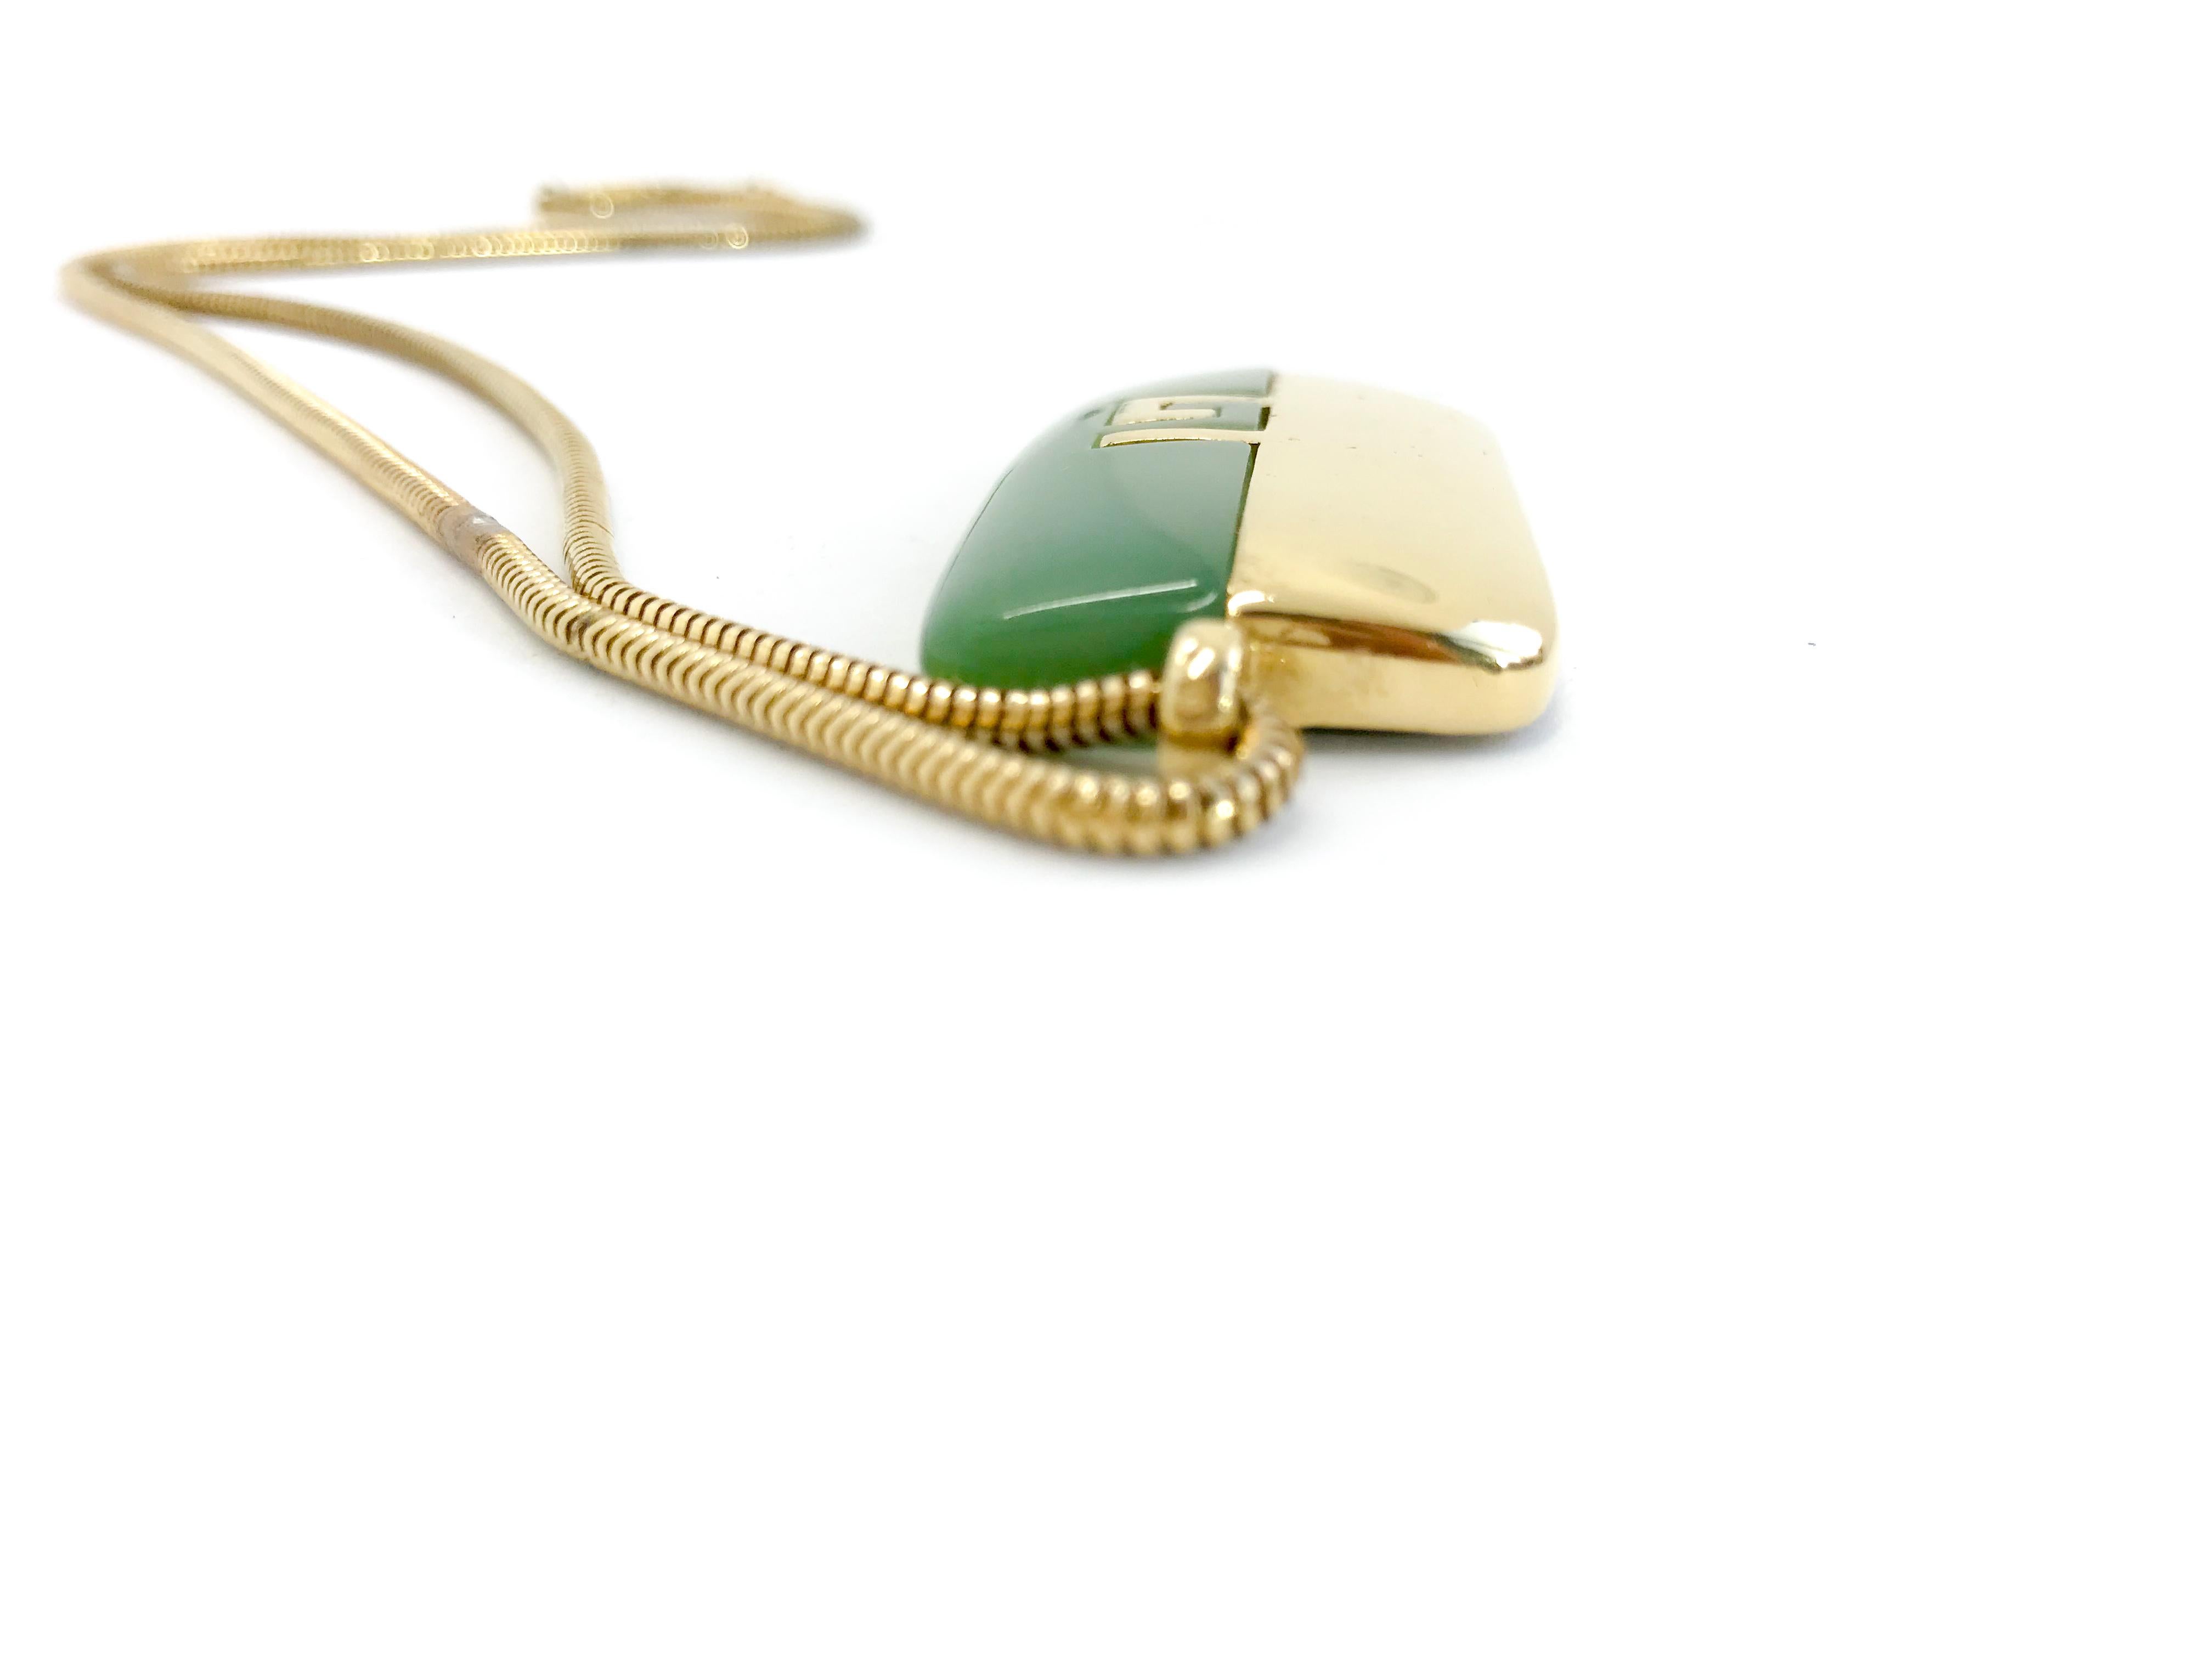 Givenchy 70s Vintage Faux Jade and Gold Pendant Necklace on Snake Chain.

Signed Givenchy on reverse of pendant and on chain with G logo closure.  

23 inches gold tone snake chain has the fold over clasp with two signature G's. 

Pendant measures 2